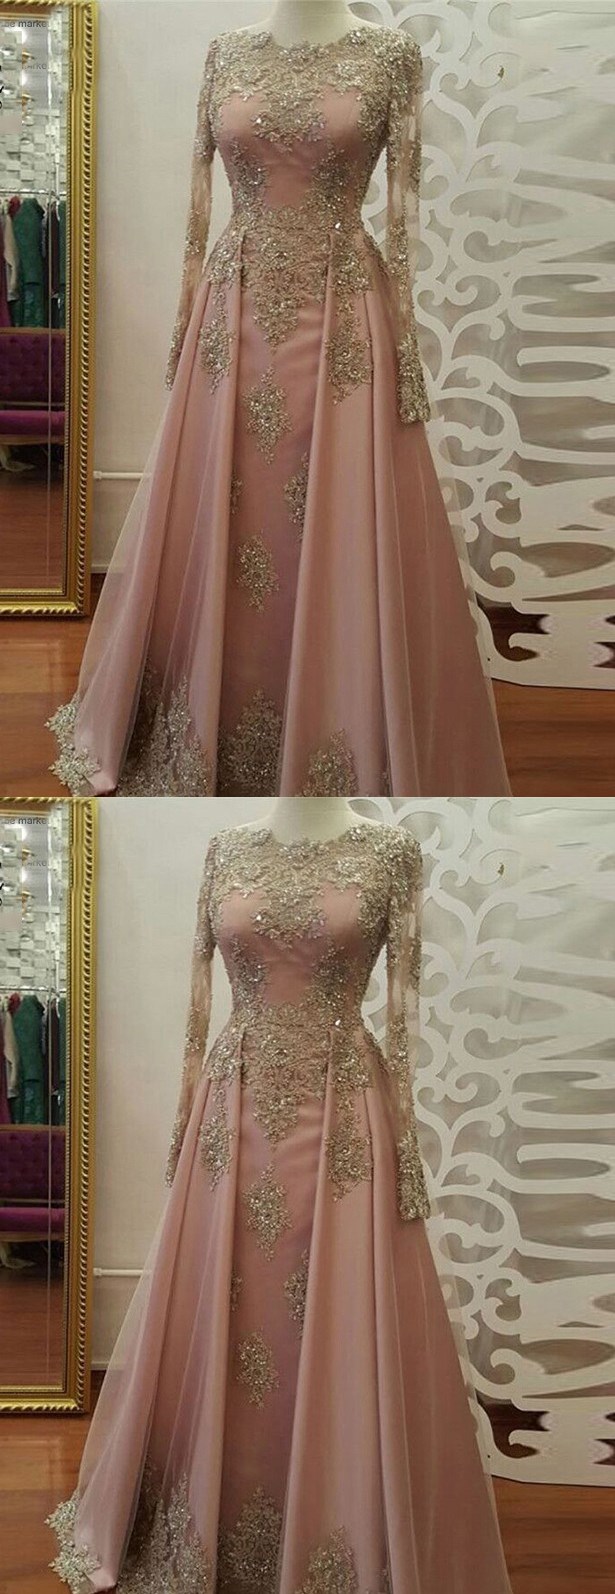 Long Sleeve Evening Dress, Long Prom Dresses With Gold Lace, Beadings Floor Length Satin Formal Party Gowns, Lace Evening Dresses